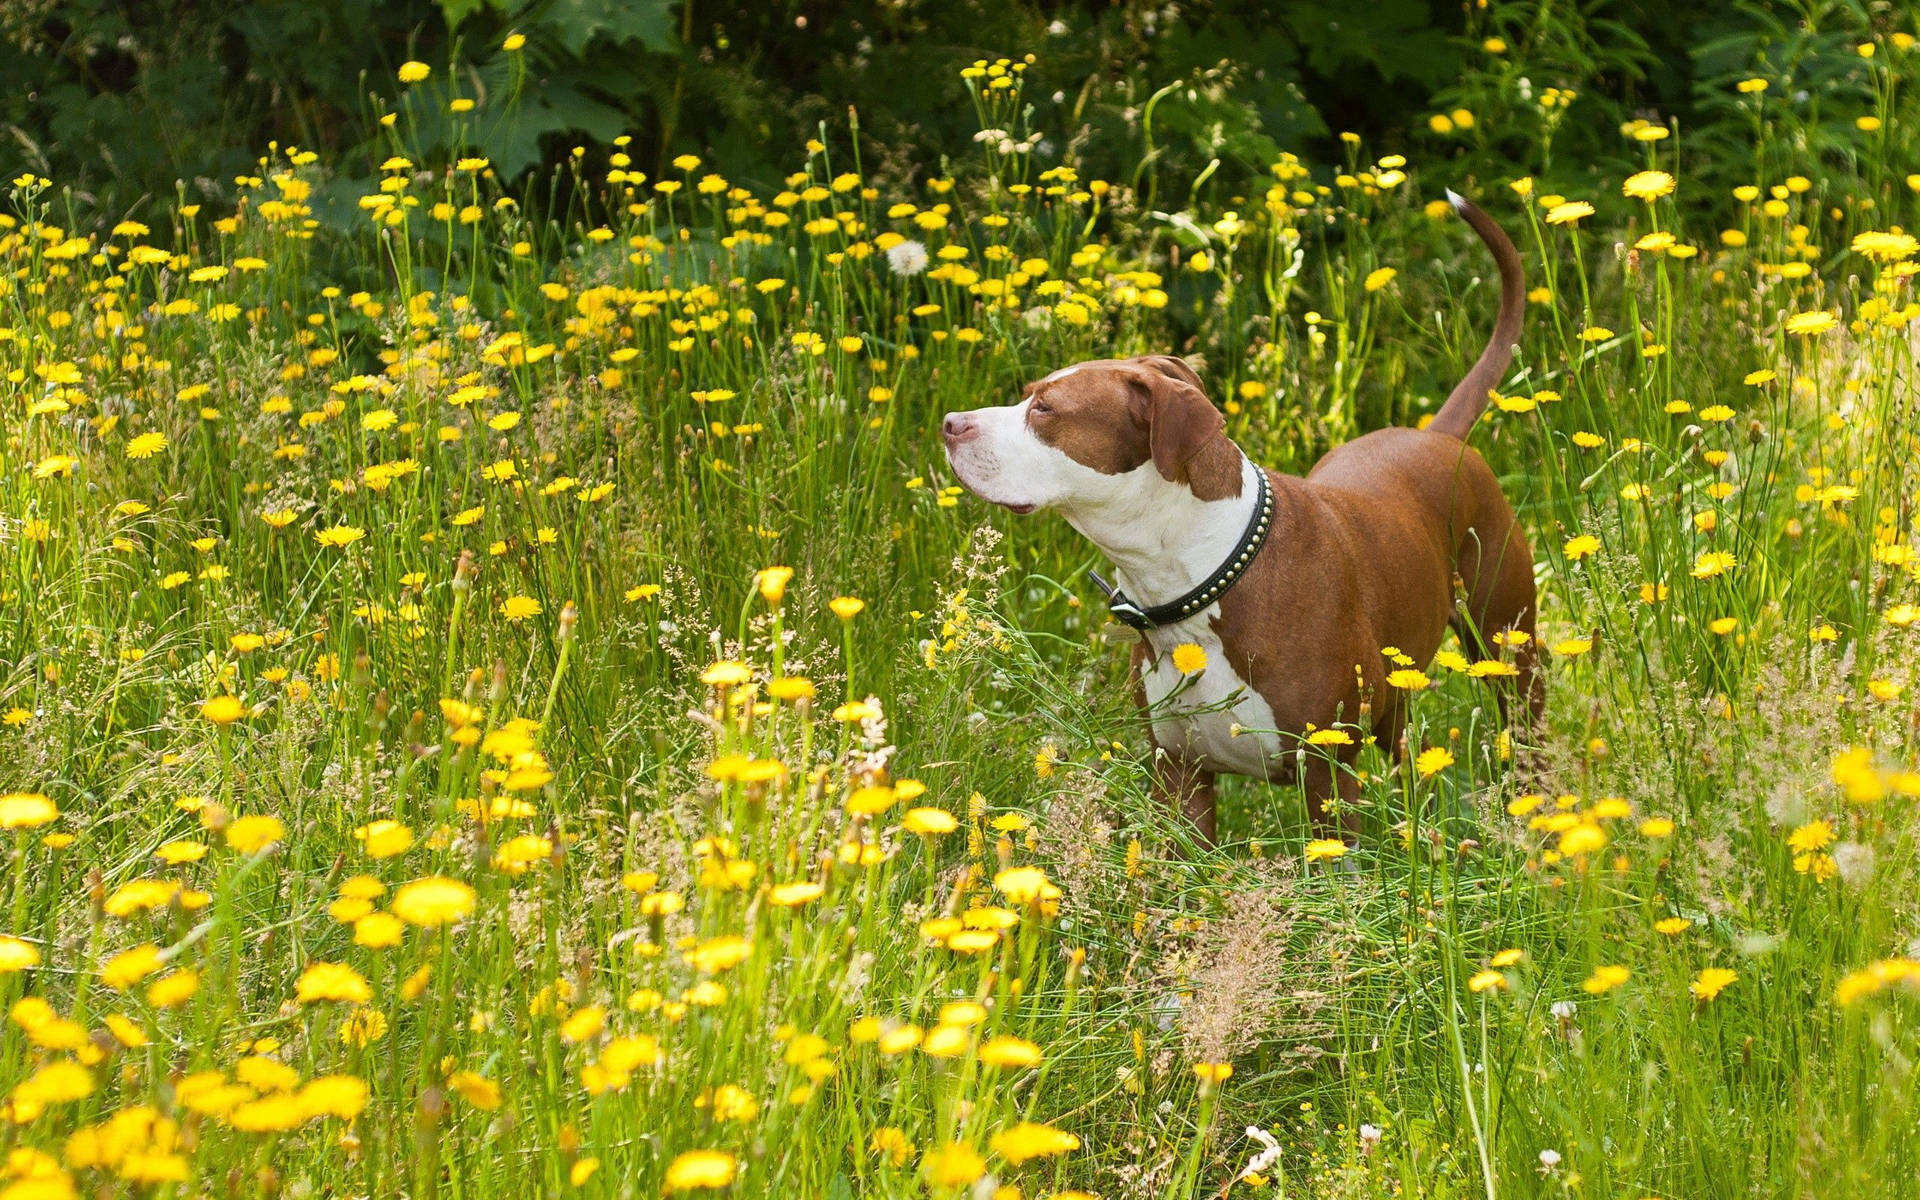 A Lovely Pit Bull Dog Enjoying The Sunny Day In A Field Of Flowers Background